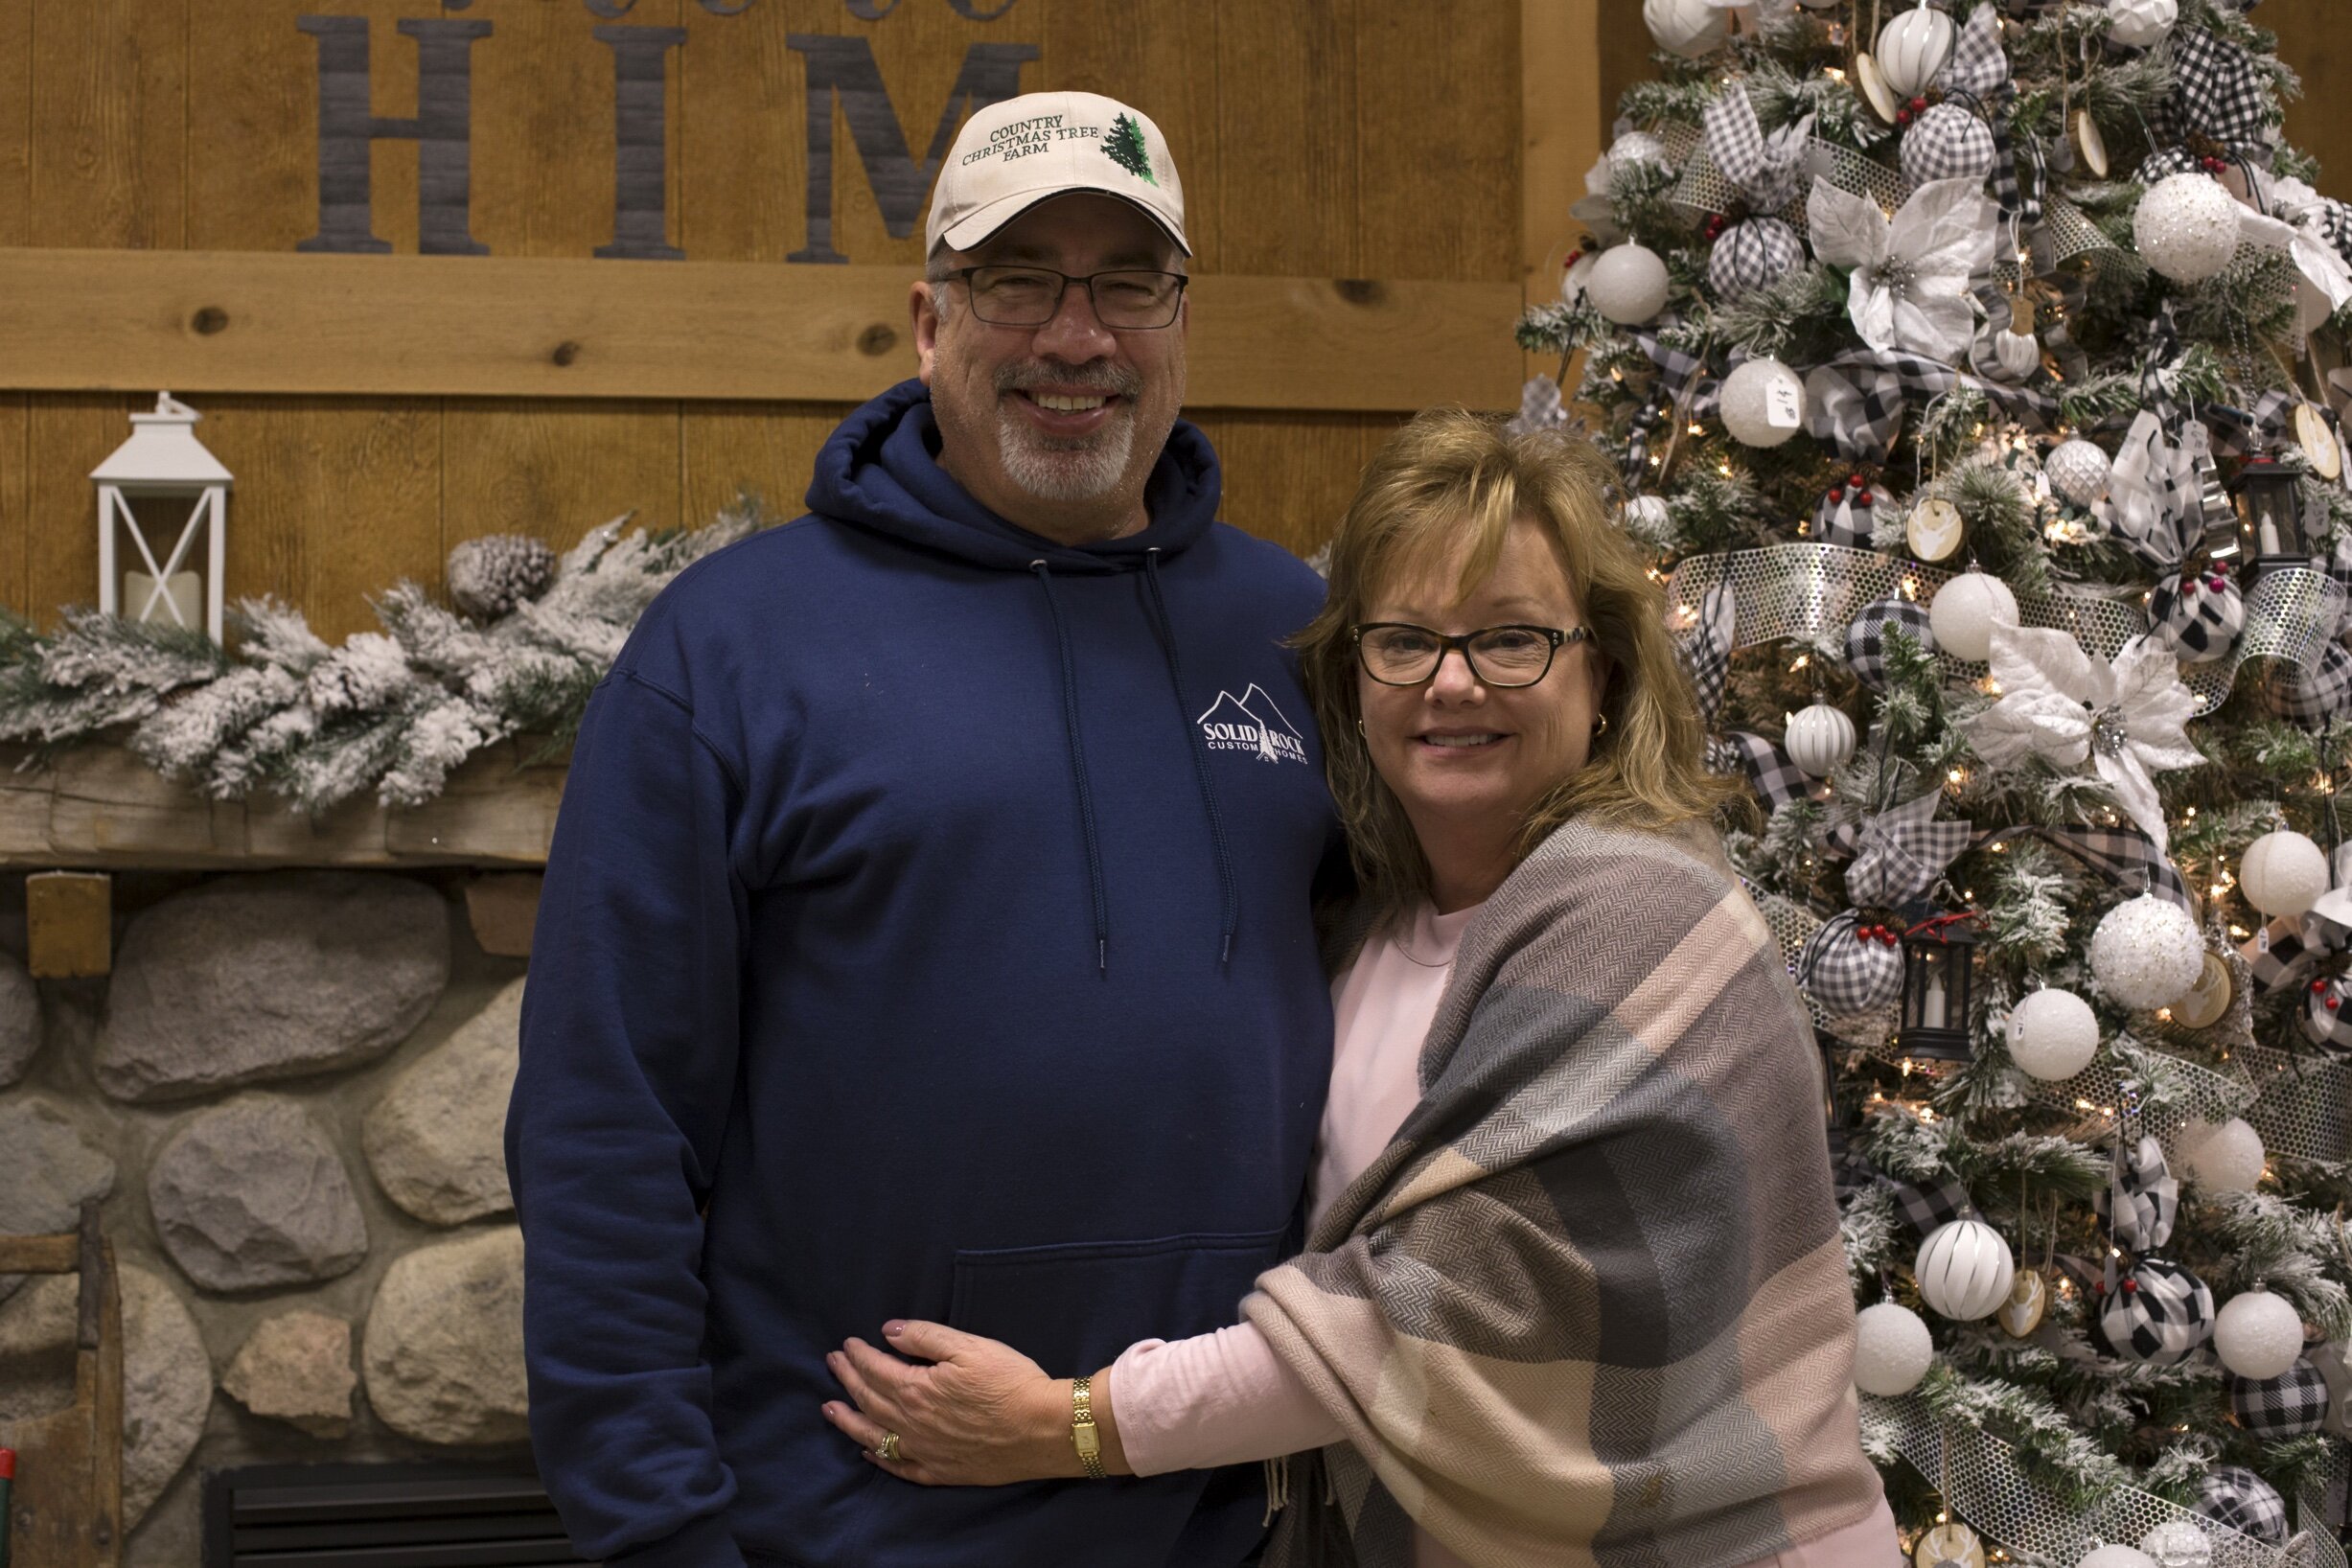 Country Christmas Tree Farm owners Ed and Theresa Shephard pose for a photo in front of the fireplace at the gift shop.